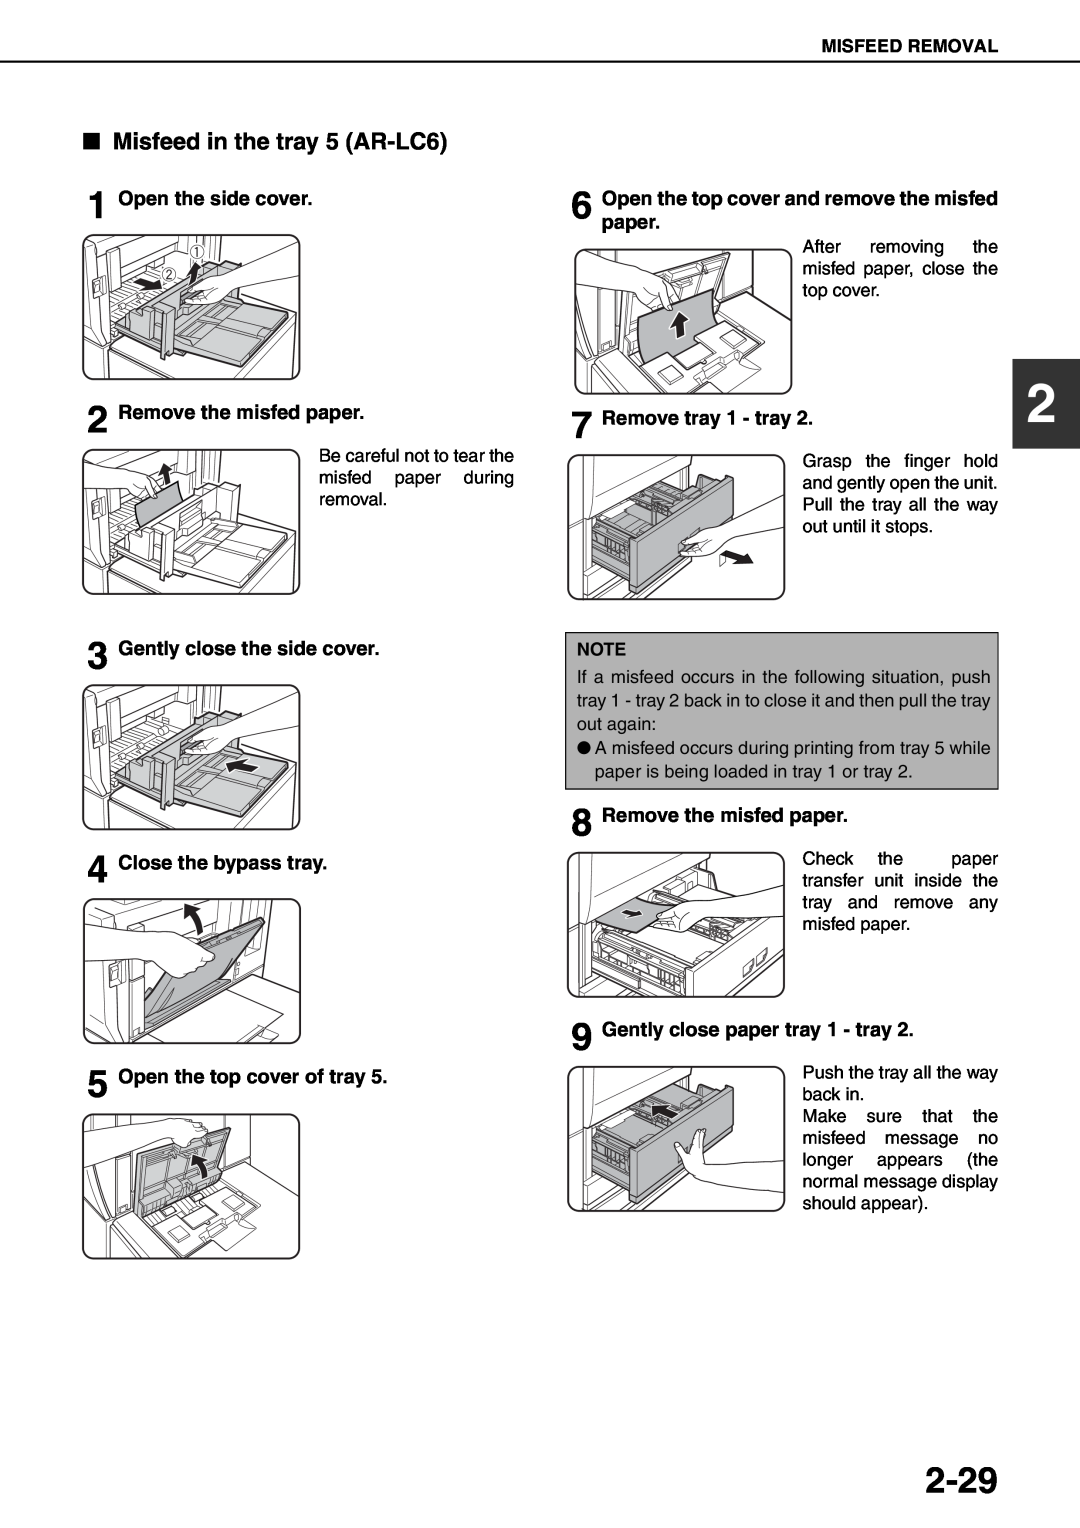 Sharp MX-M620U 2-29, Misfeed in the tray 5 AR-LC6, Open the side cover 2 Remove the misfed paper, Remove tray 1 - tray 